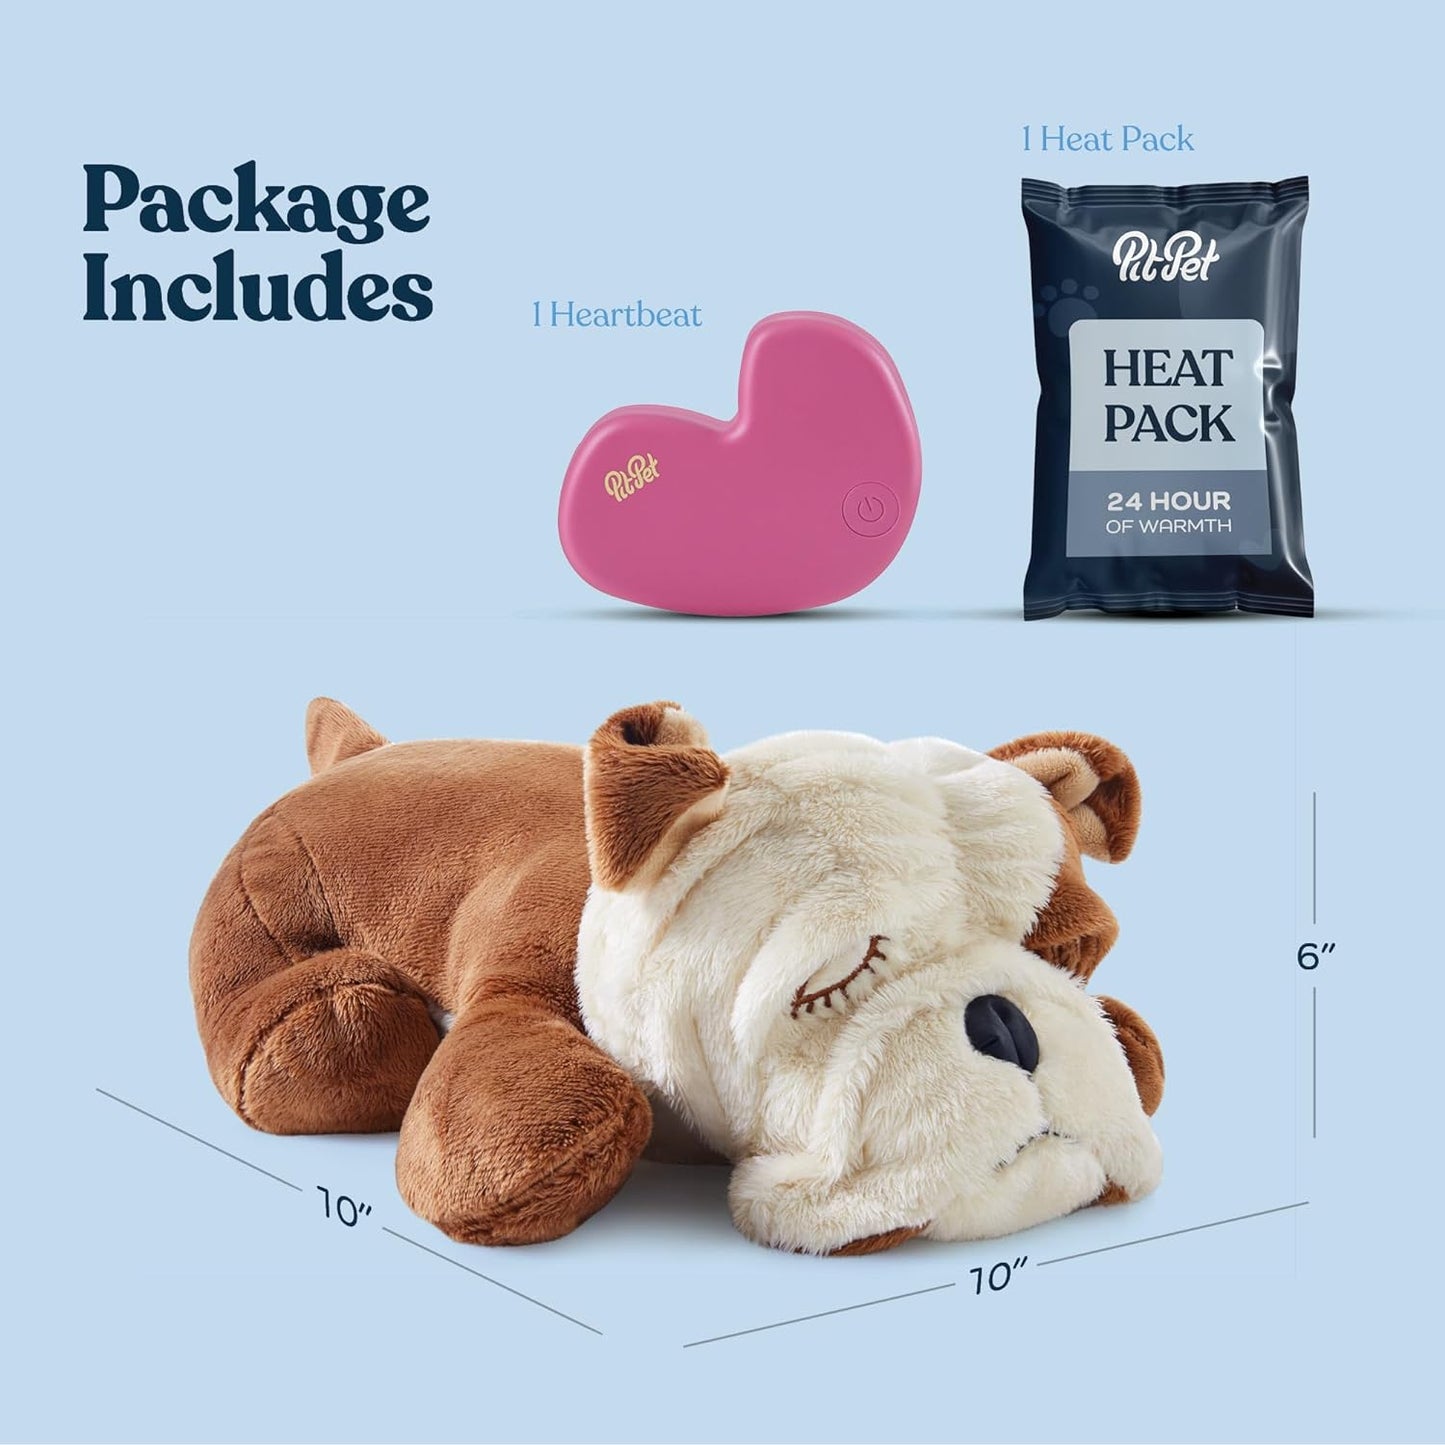 Heartbeat Plush Dog Toy - Heartbeat Helps for Dog Anxiety Relief and Calming Aid - Stuffed Dog Toys with Disposable Heat Pack - Comfort Toy for Puppy Dogs Cats Pets -Plush Toys for Dogs.